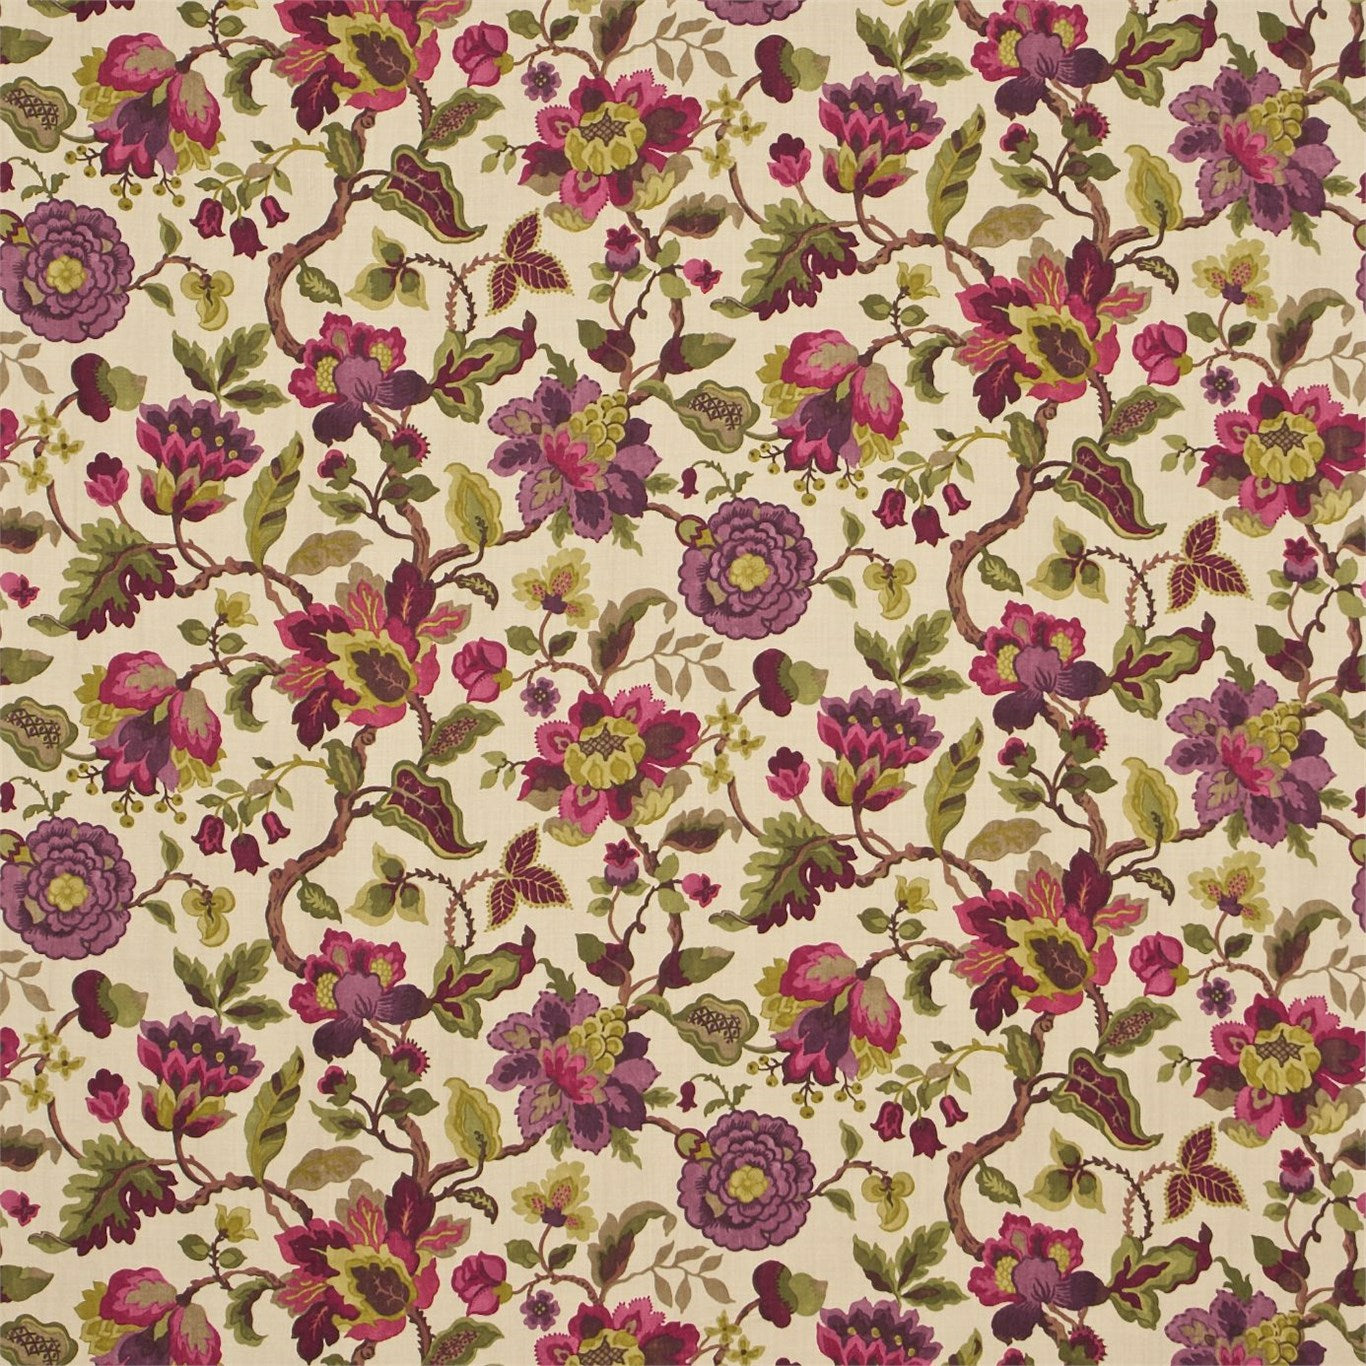 Amanpuri Fabric by Sanderson - DCOUAM203 - Mulberry/Olive